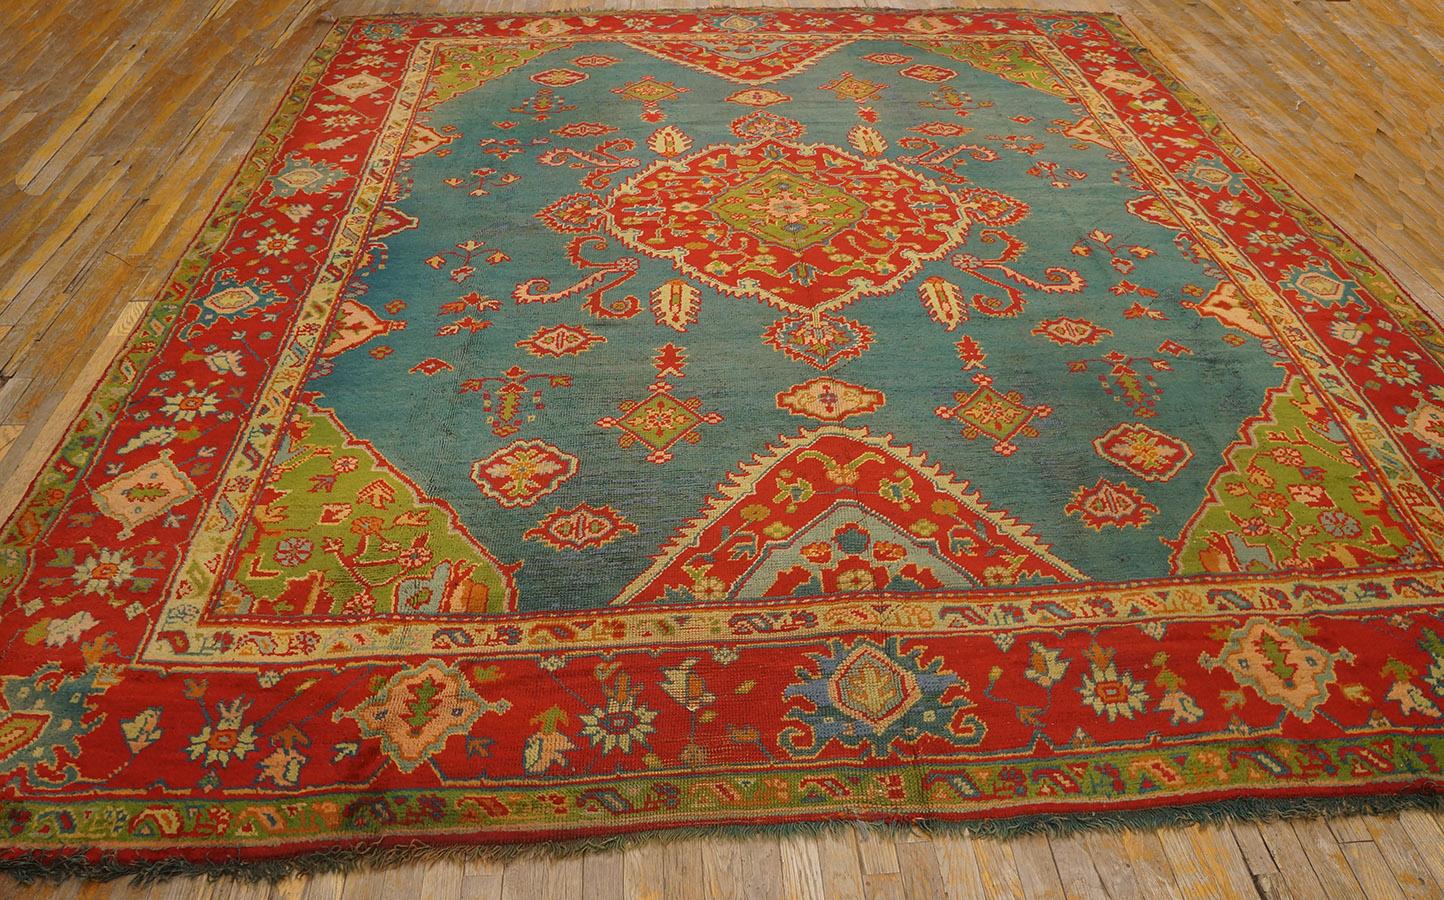 Hand-Knotted Late 19th Century Turkish Oushak Carpet ( 11' 2'' x 13' 1'' - 340 x 398 cm ) For Sale